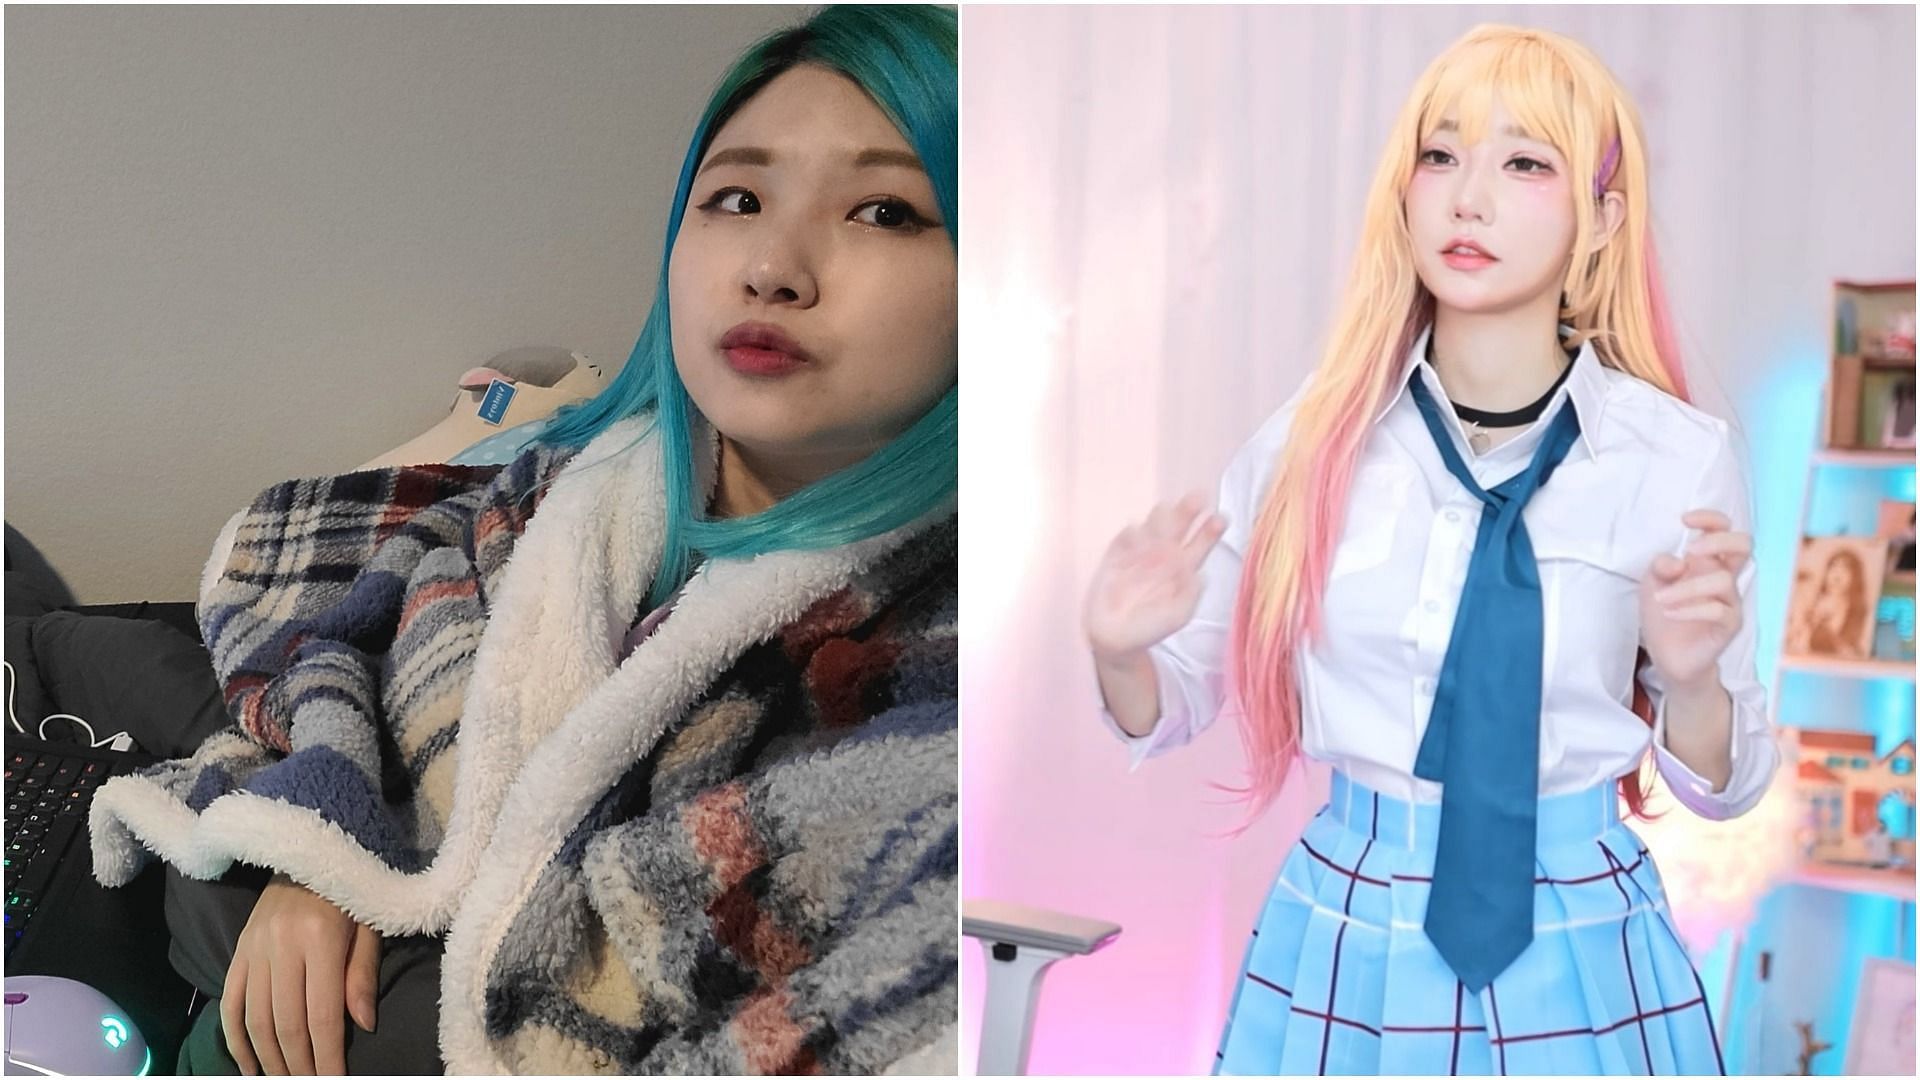 HAChubby was surprised when popular Korean streamer Magenta recognized her (Images via HAChubby and Magenta/Twitch)